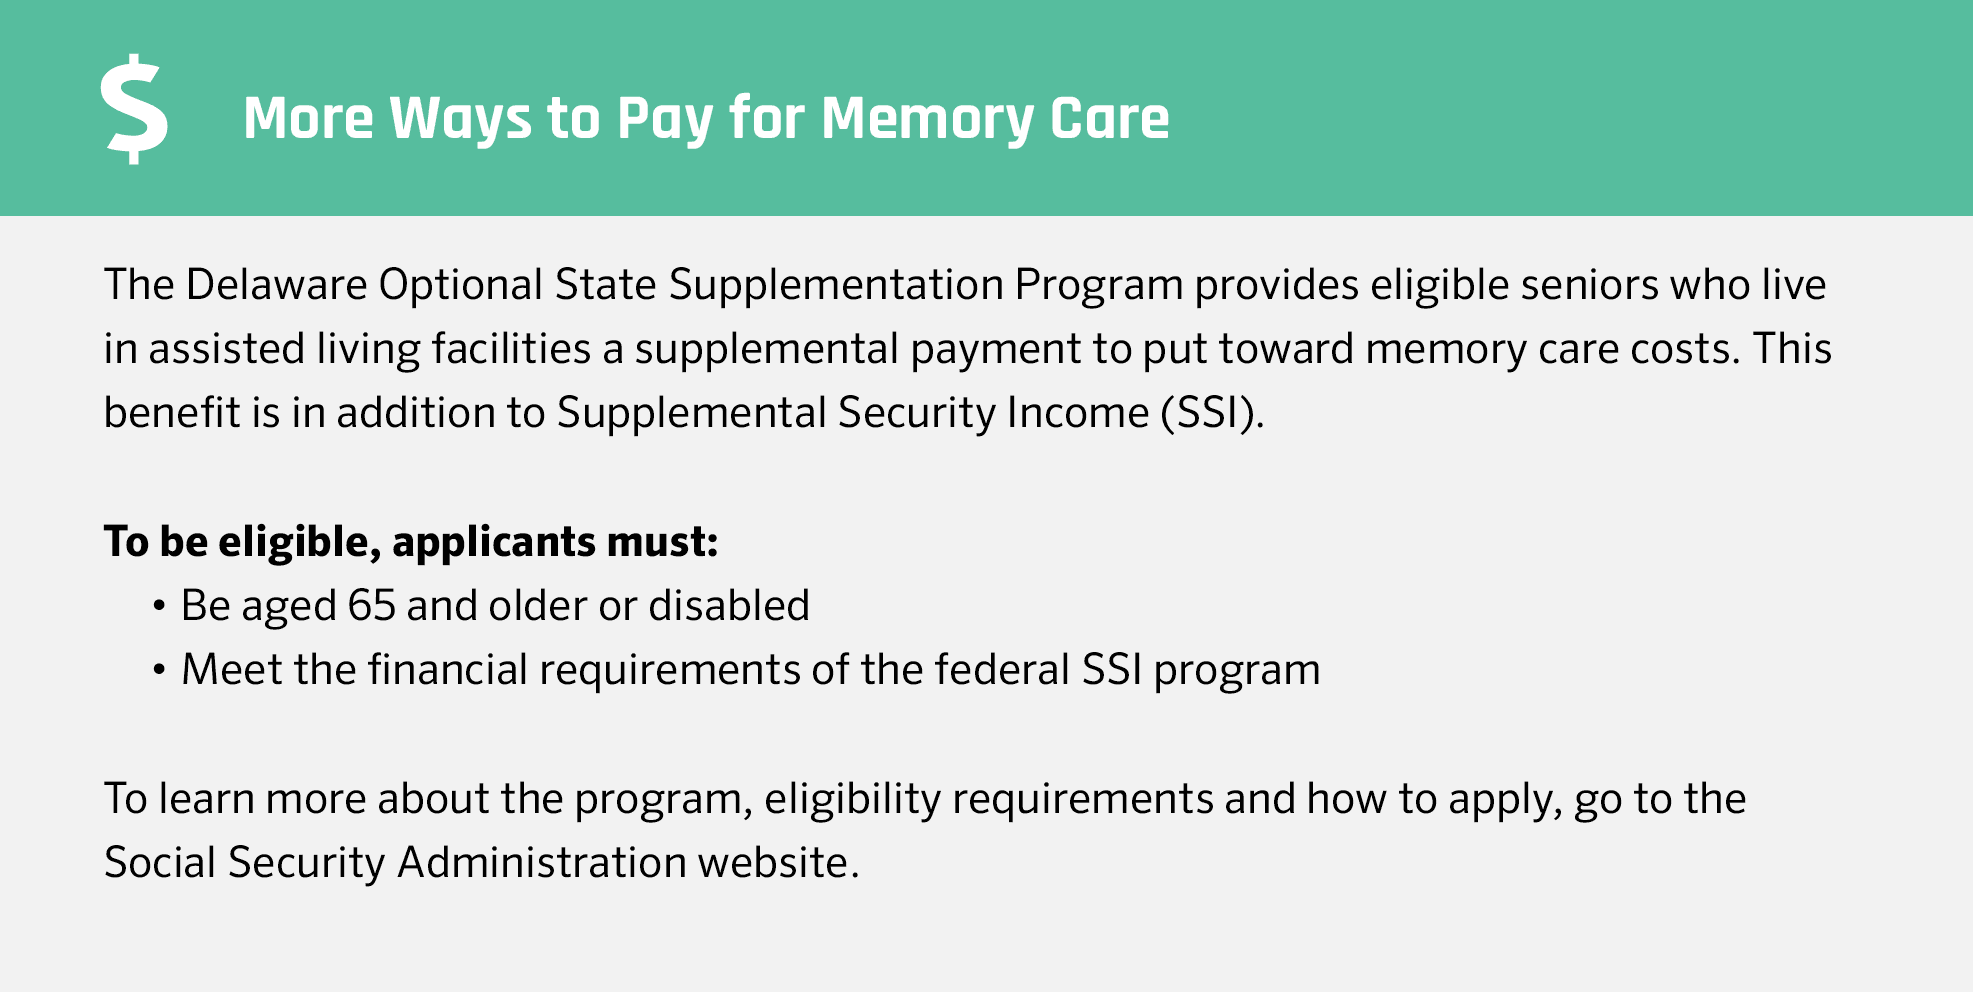 More ways to pay for memory care in Delaware